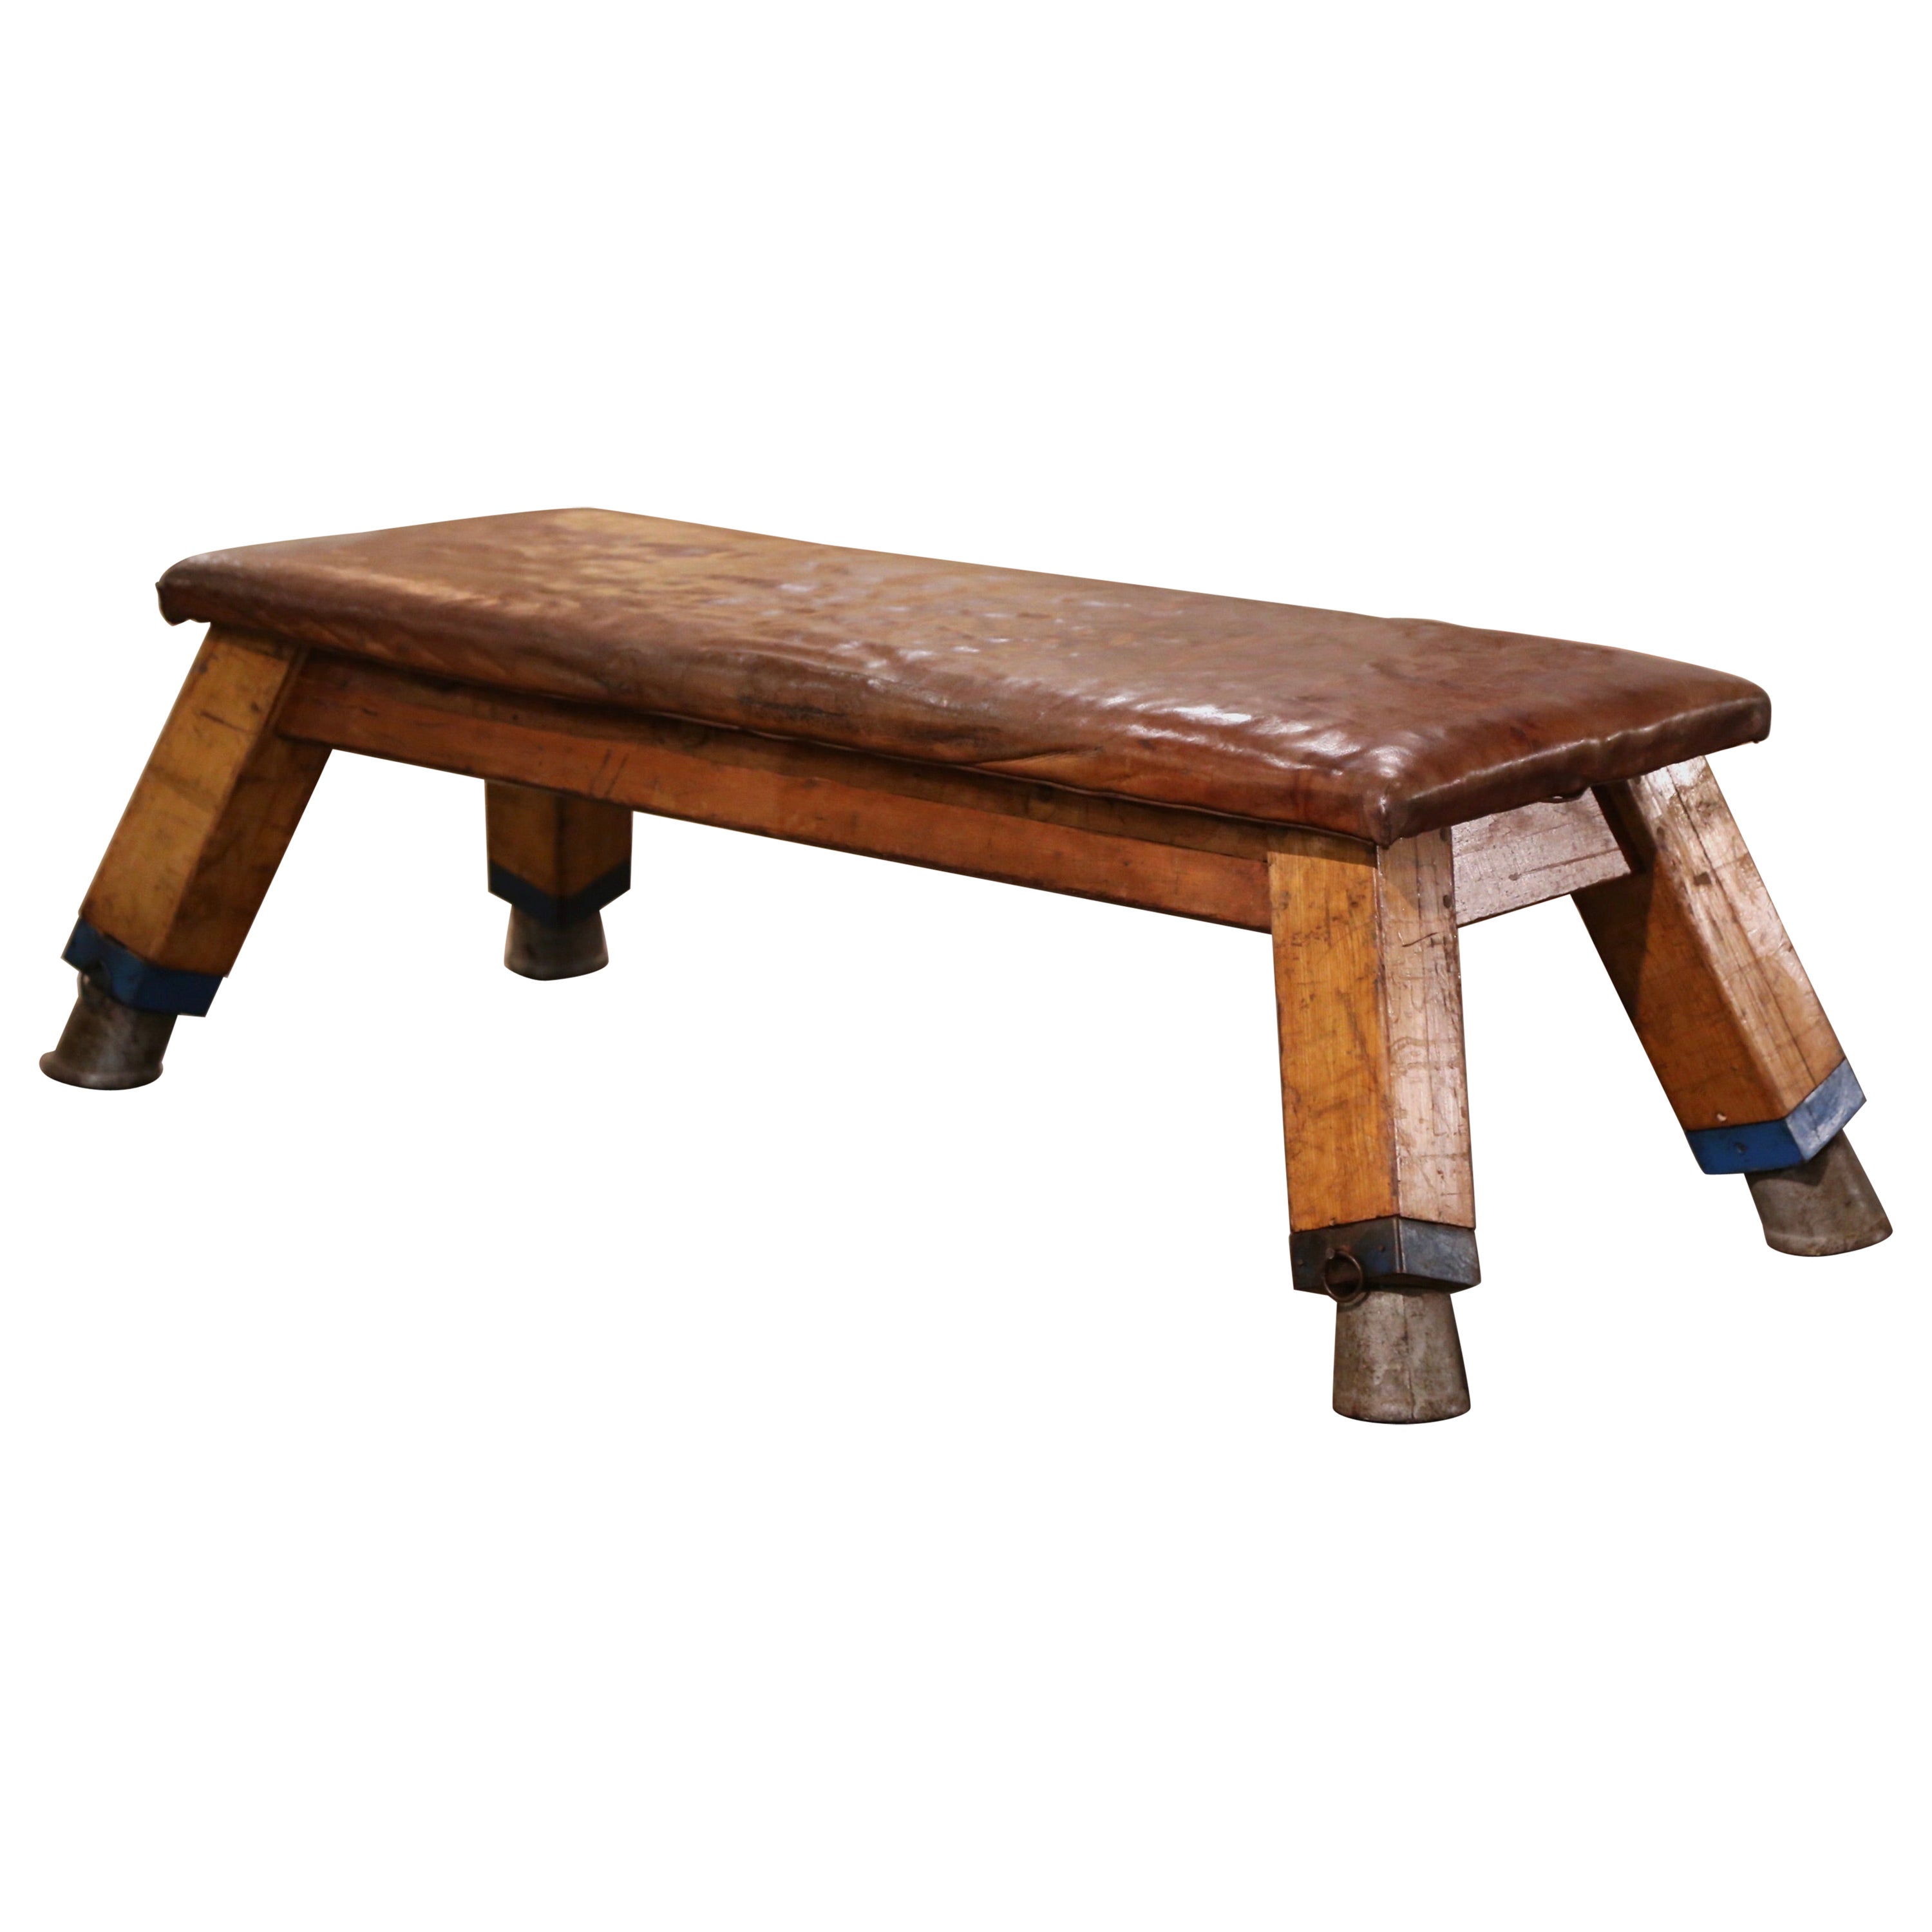 Early 20th Century Czech Tan Leather Top Pine Four-Leg Workout Training Bench For Sale